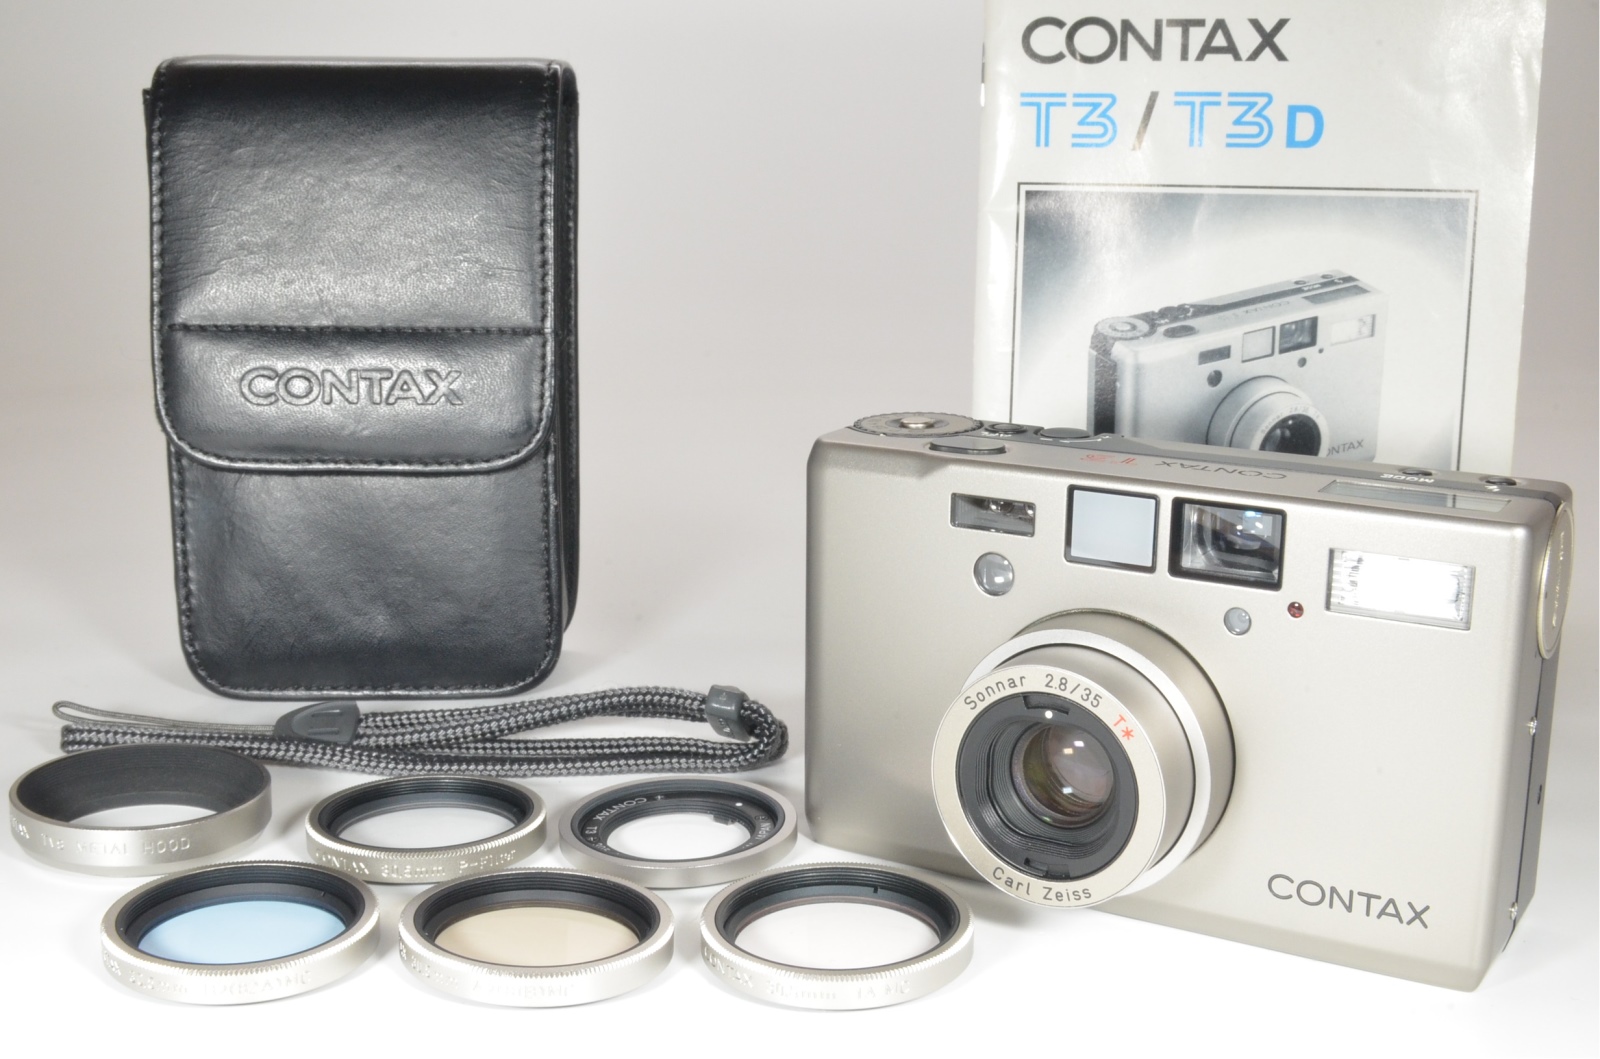 CONTAX T3 P&S 35mm Film Camera with Hood and 4 Lens Filters #a0869 